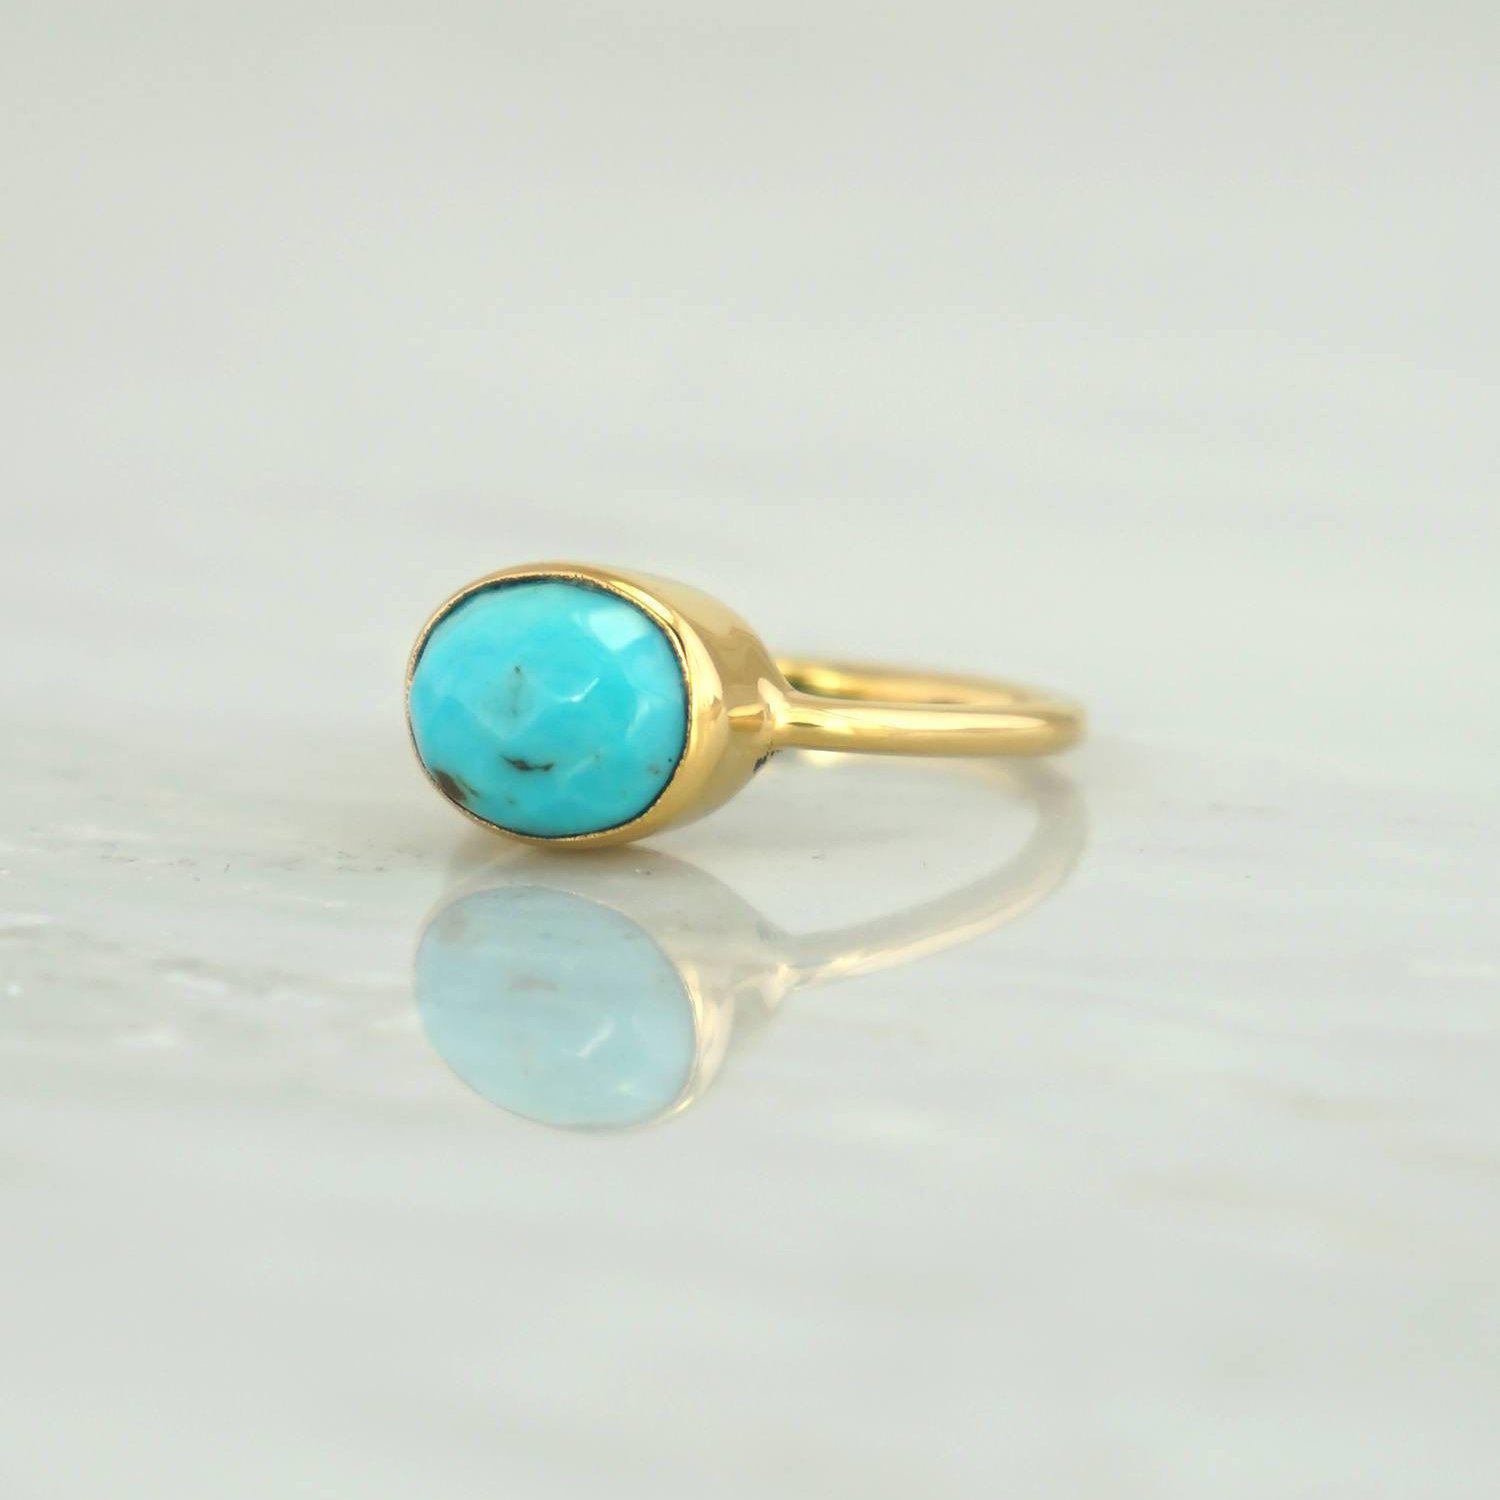 Jane Austen ring, Turquoise Ring, Oval Turquoise Ring, Sleeping Beauty Ring, December birthstone, Silver Ring, 925 Silver,Everyday Ring